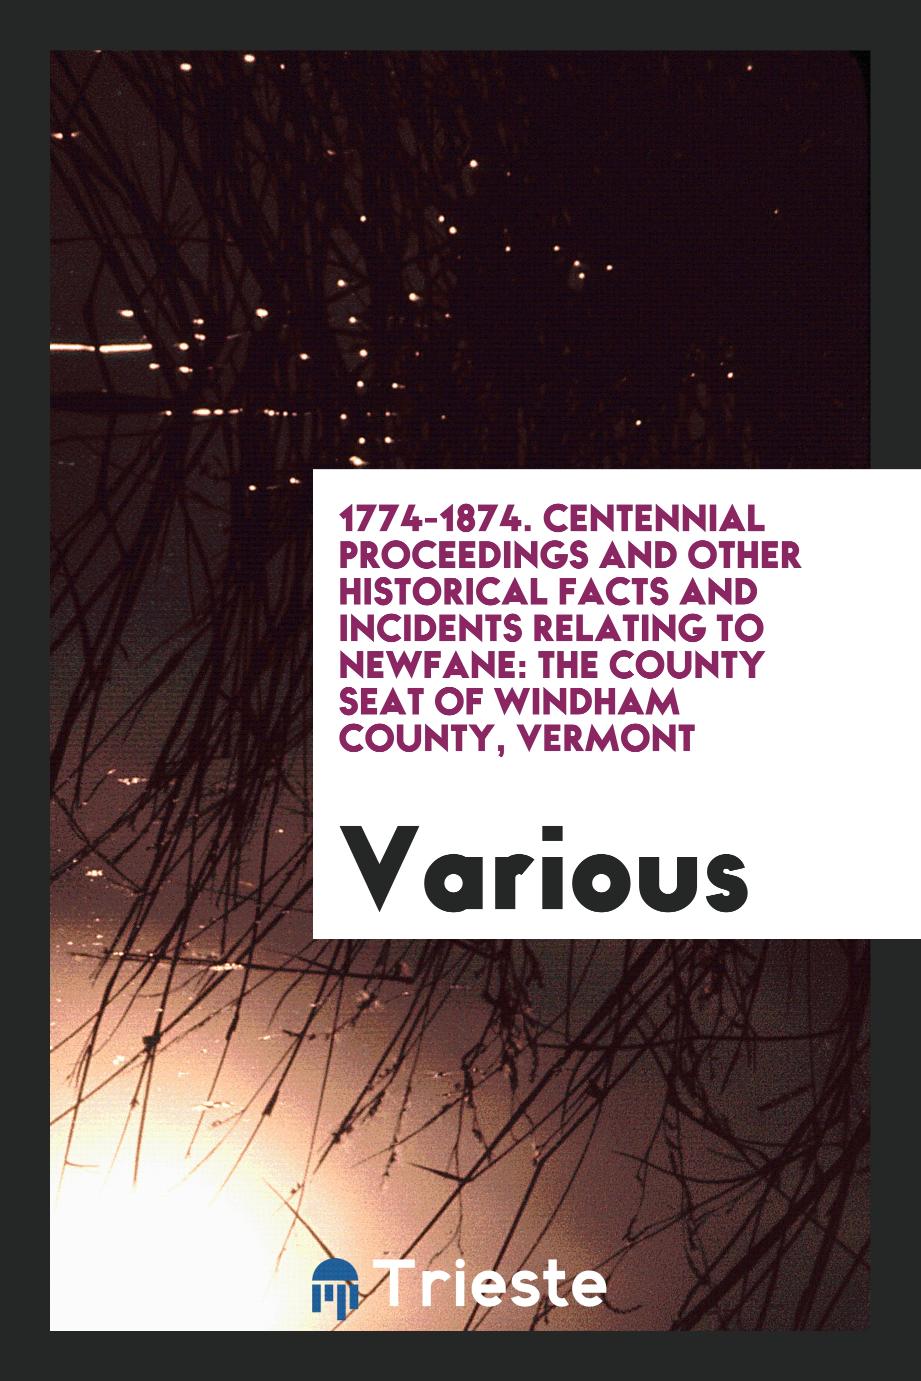 1774-1874. Centennial Proceedings and Other Historical Facts and Incidents Relating to Newfane: The County Seat of Windham County, Vermont